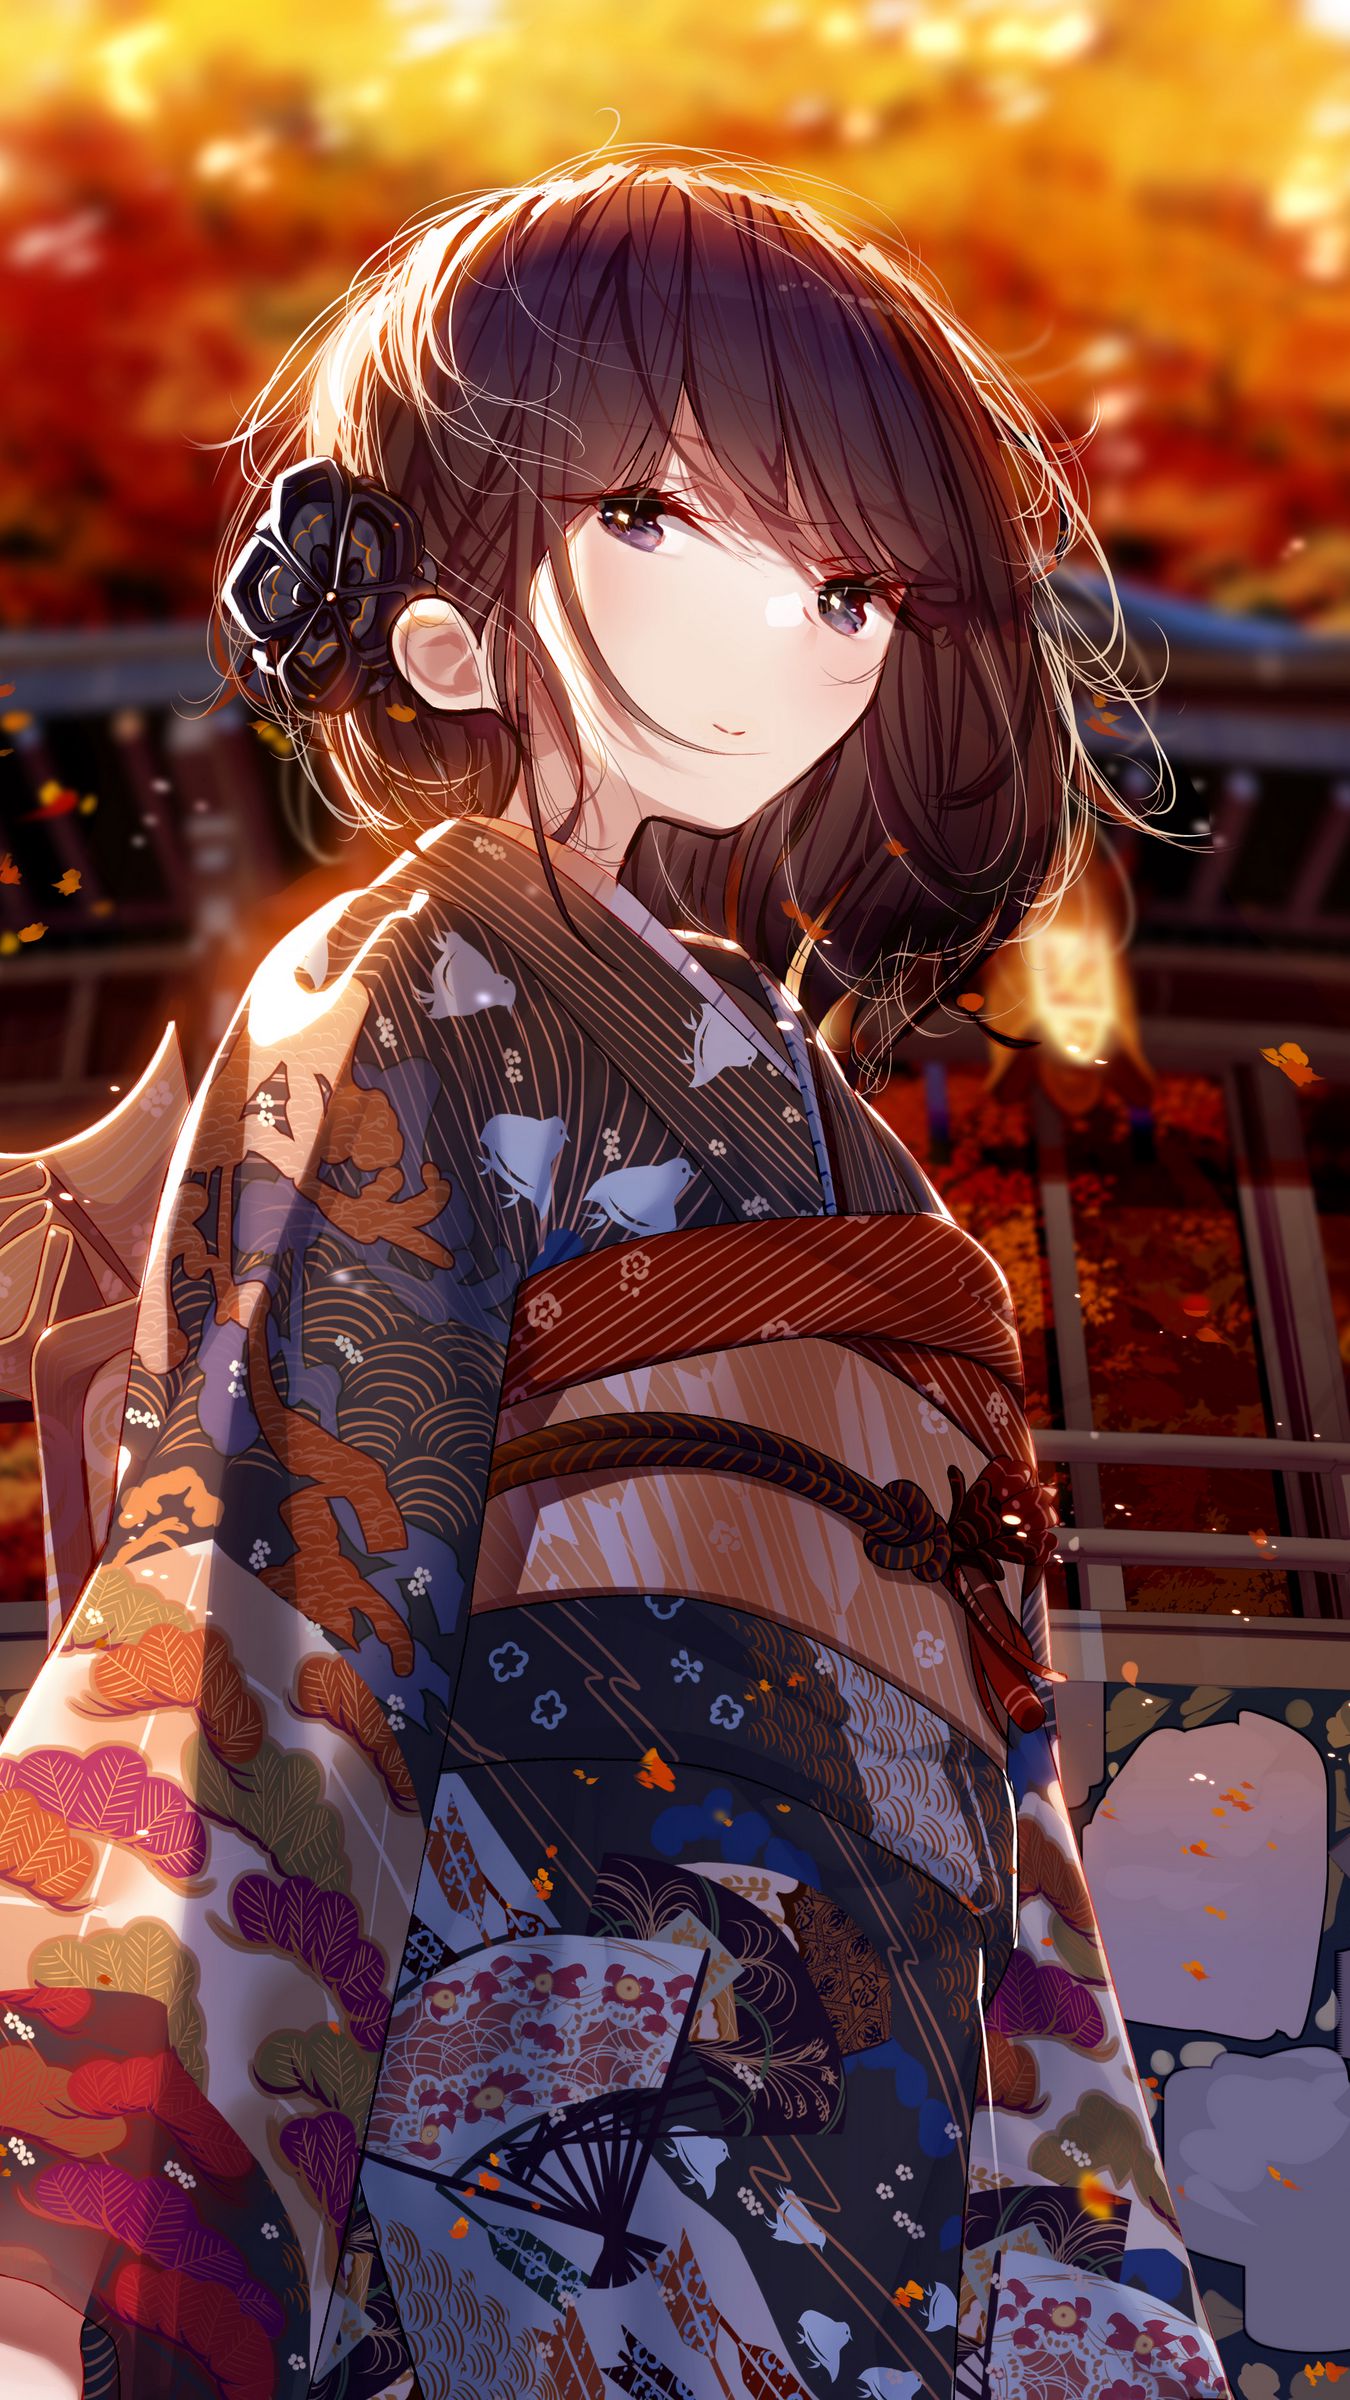 Download wallpaper 1350x2400 girl, kimono, japan, anime iphone 8+/7+/6s+/6+  for parallax hd background